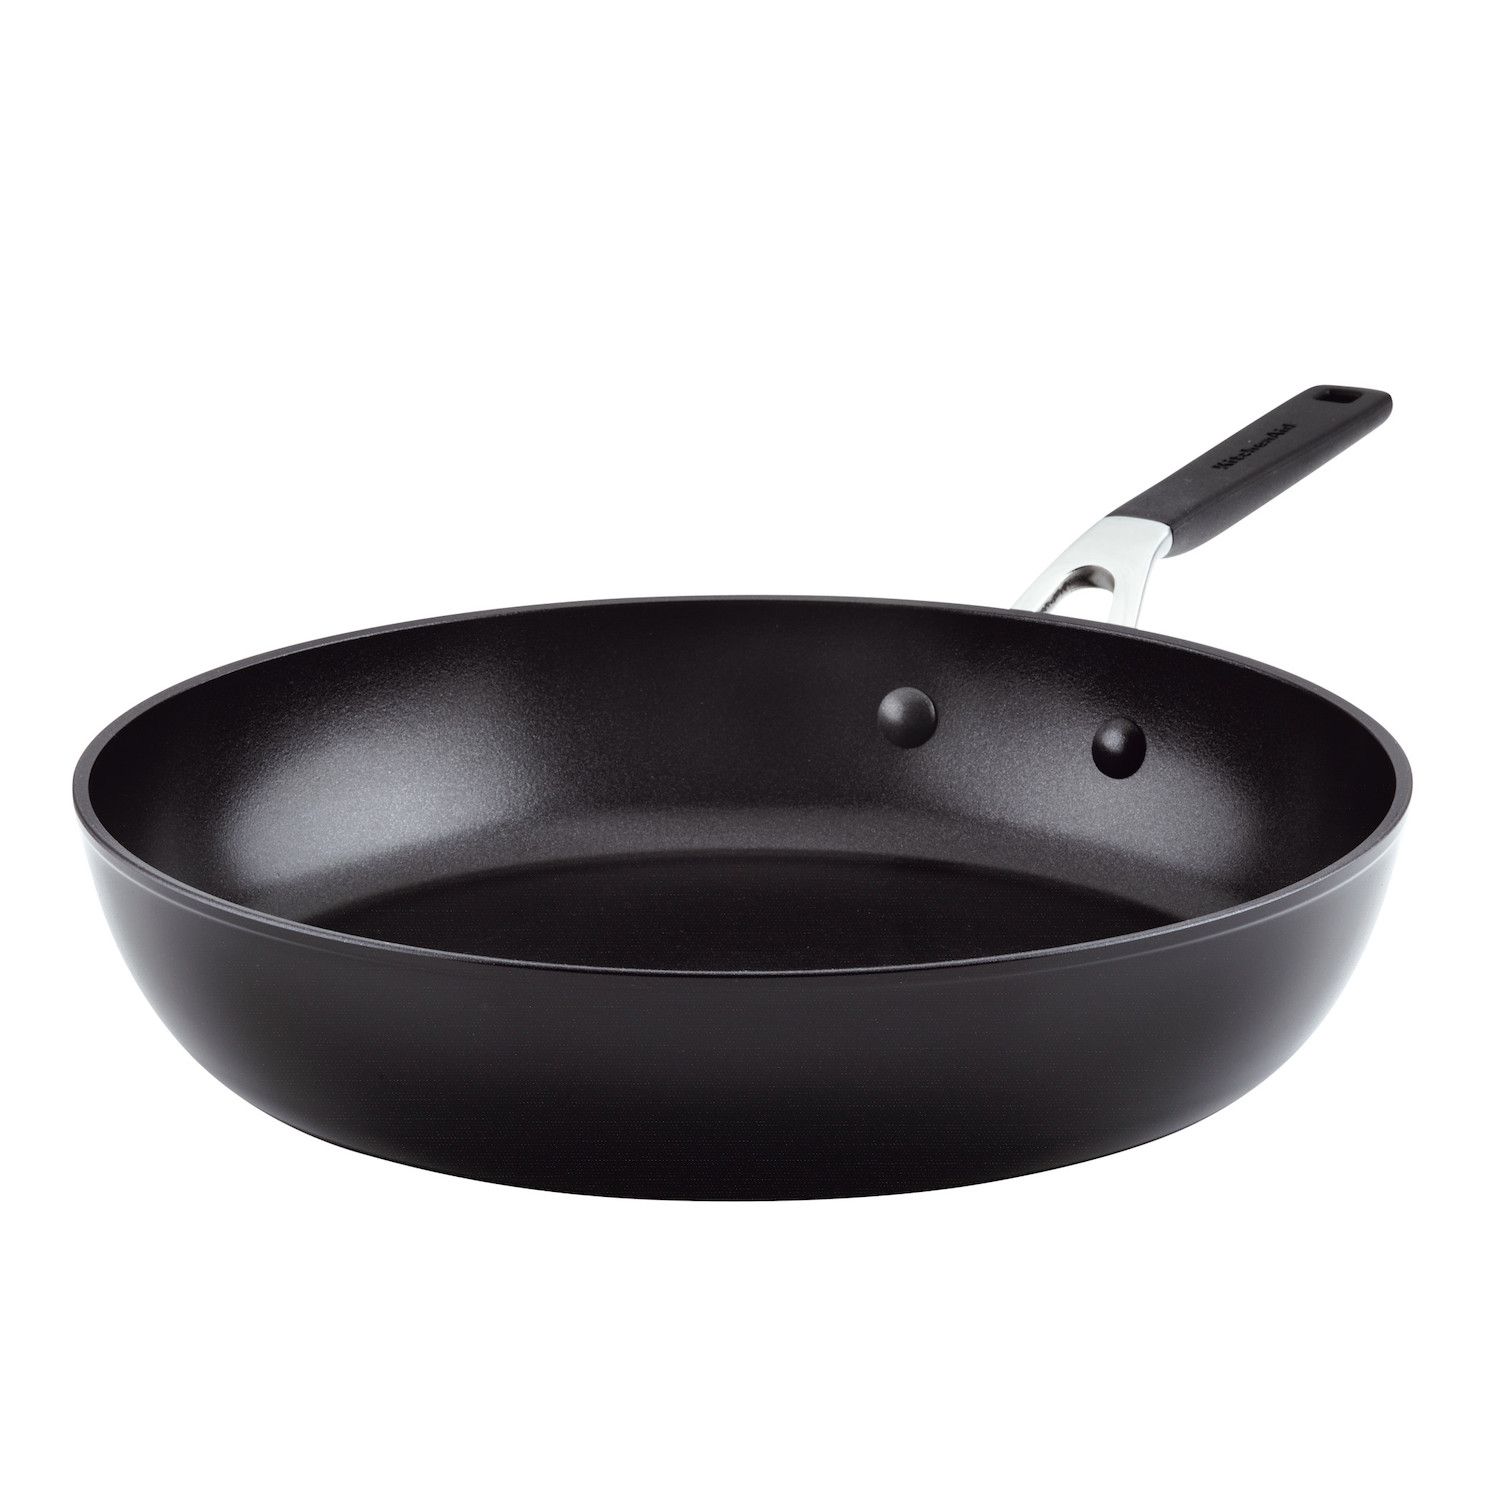 TECHEF Onyx Collection - 12 Inch Frying Pan with Cover - On Sale